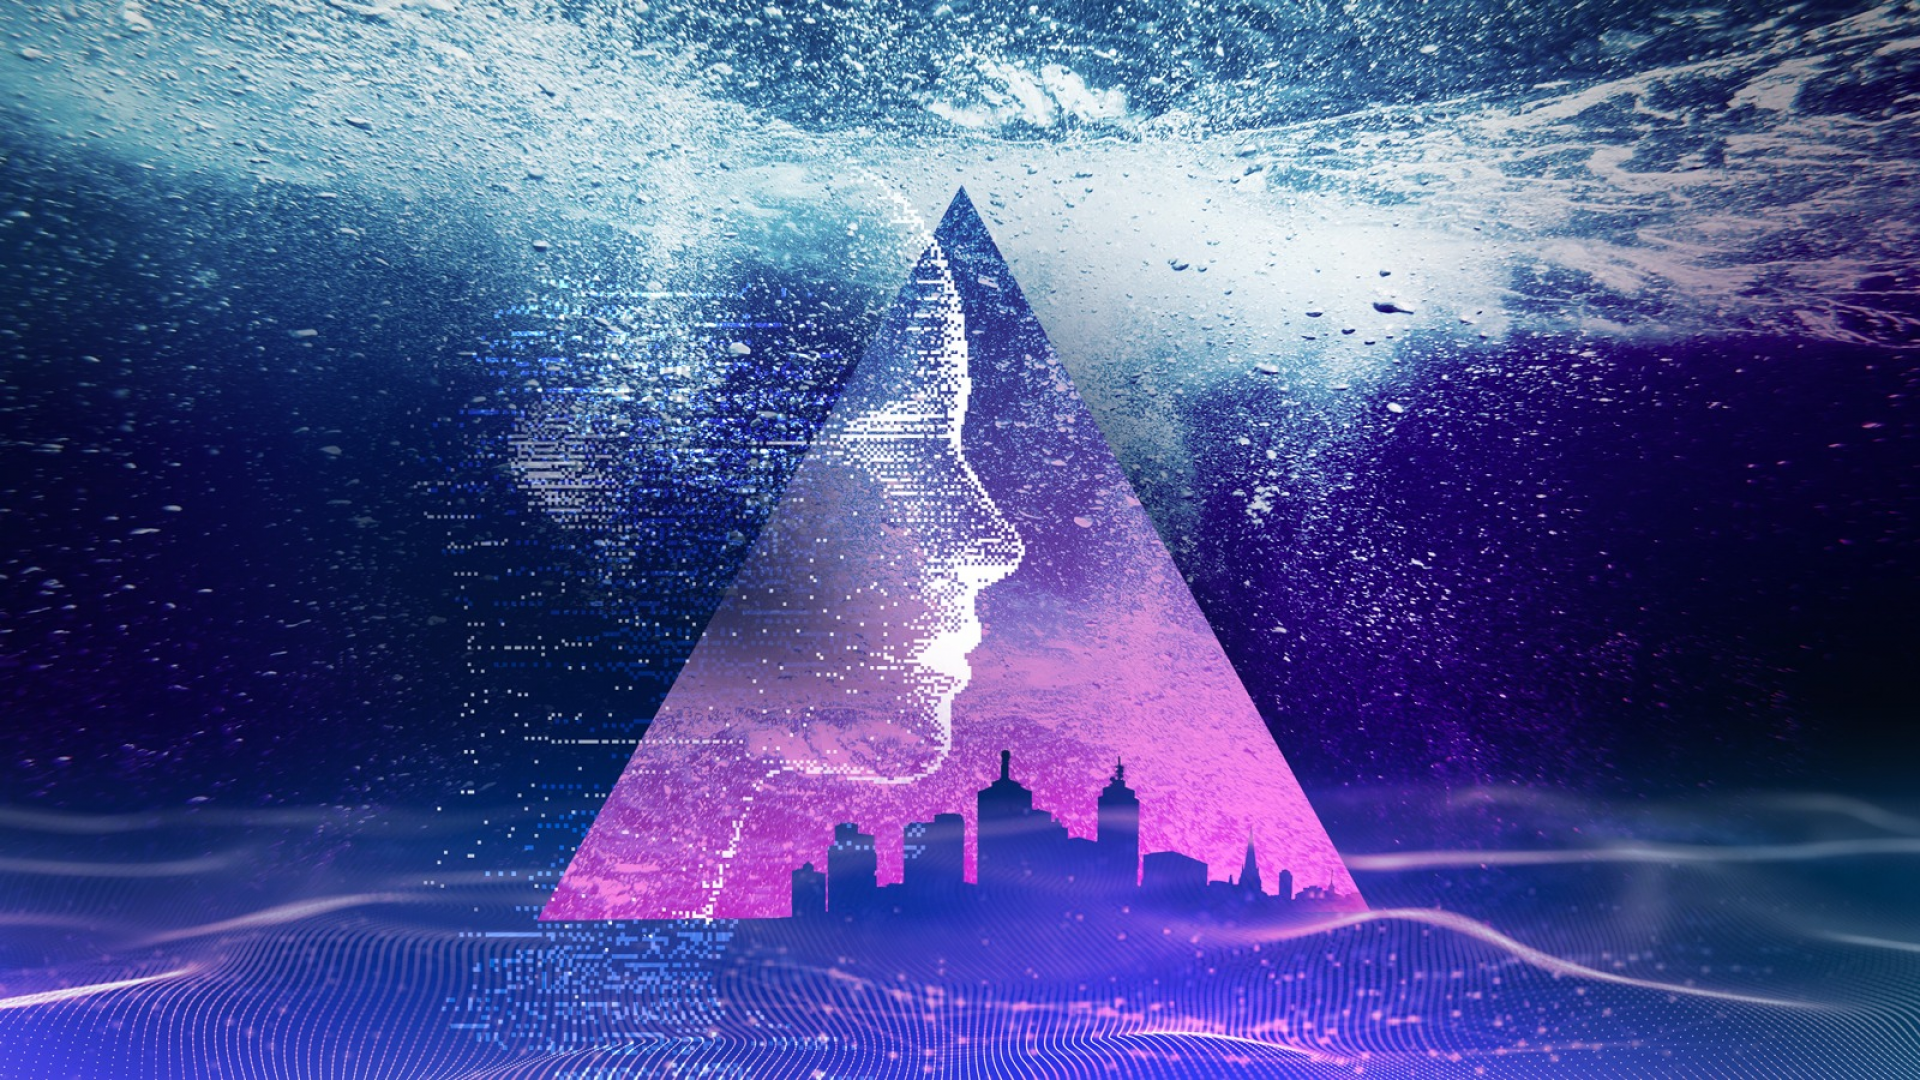 The image reflects our abilities as a collective consciousness to create change. The purple triangle seems represents structure and strength, a prism symbolic of energy and dynamism. Within it you see a pixelated face formed from bubbles of the water, resembles the human aspect, the mind and seeing to the future. There is a silhouette cut out of the Melbourne City which is cut out of the triangle, forms the foundation which sits on the bed of the sea. This abstract image of a triangle being submerged underwater, creates a splash, a disruption on the surface of the water, and as you look deeper, you will see that underneath, there are patterns on the bed, showing a network and an undercurrent of energy.